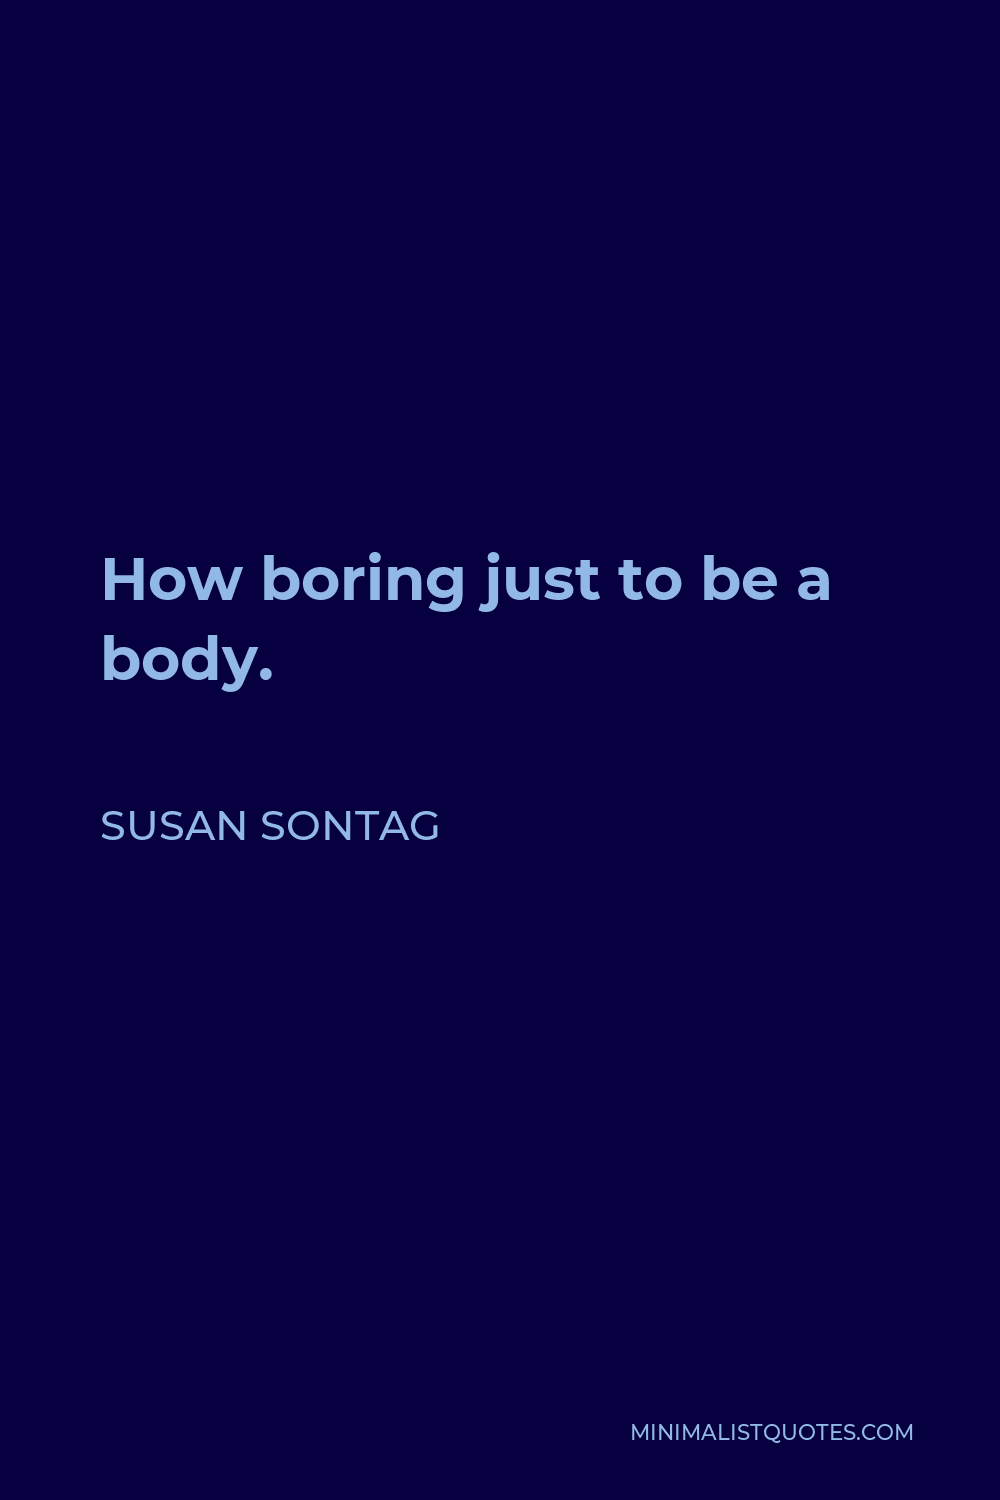 Susan Sontag Quote - How boring just to be a body.